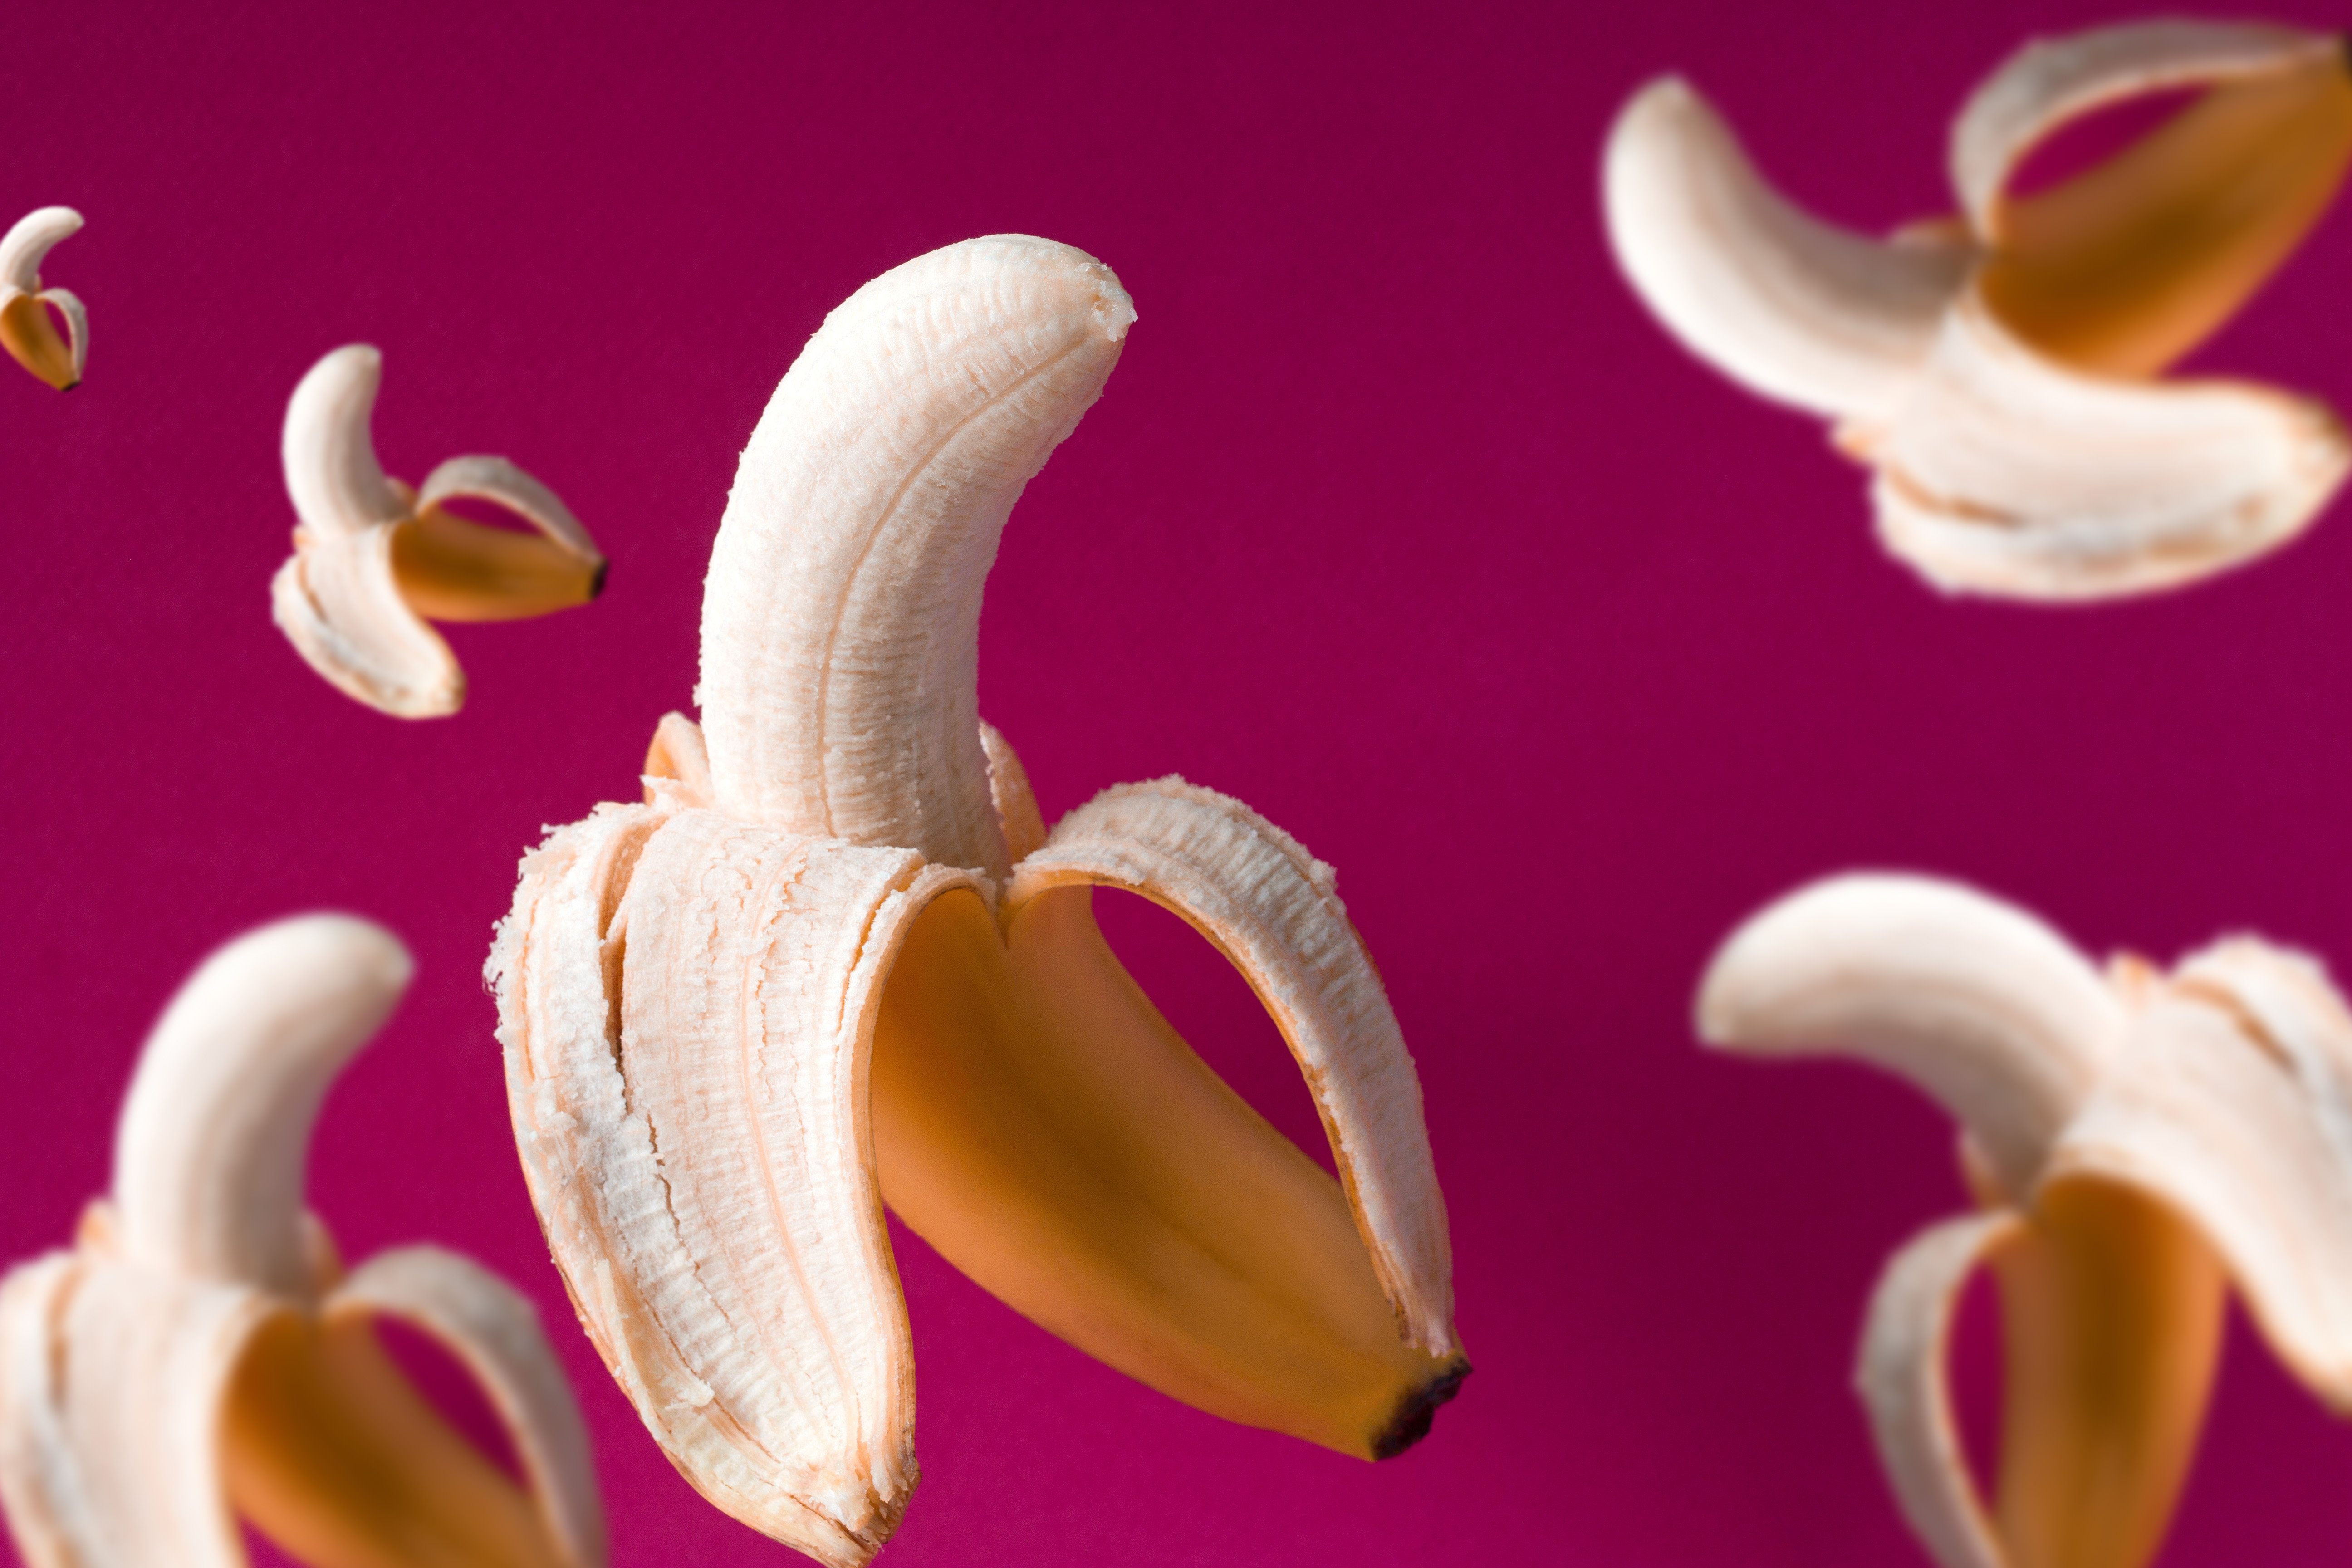 If You Don't Eat a Banana Every Day, This Might Convince You to Start